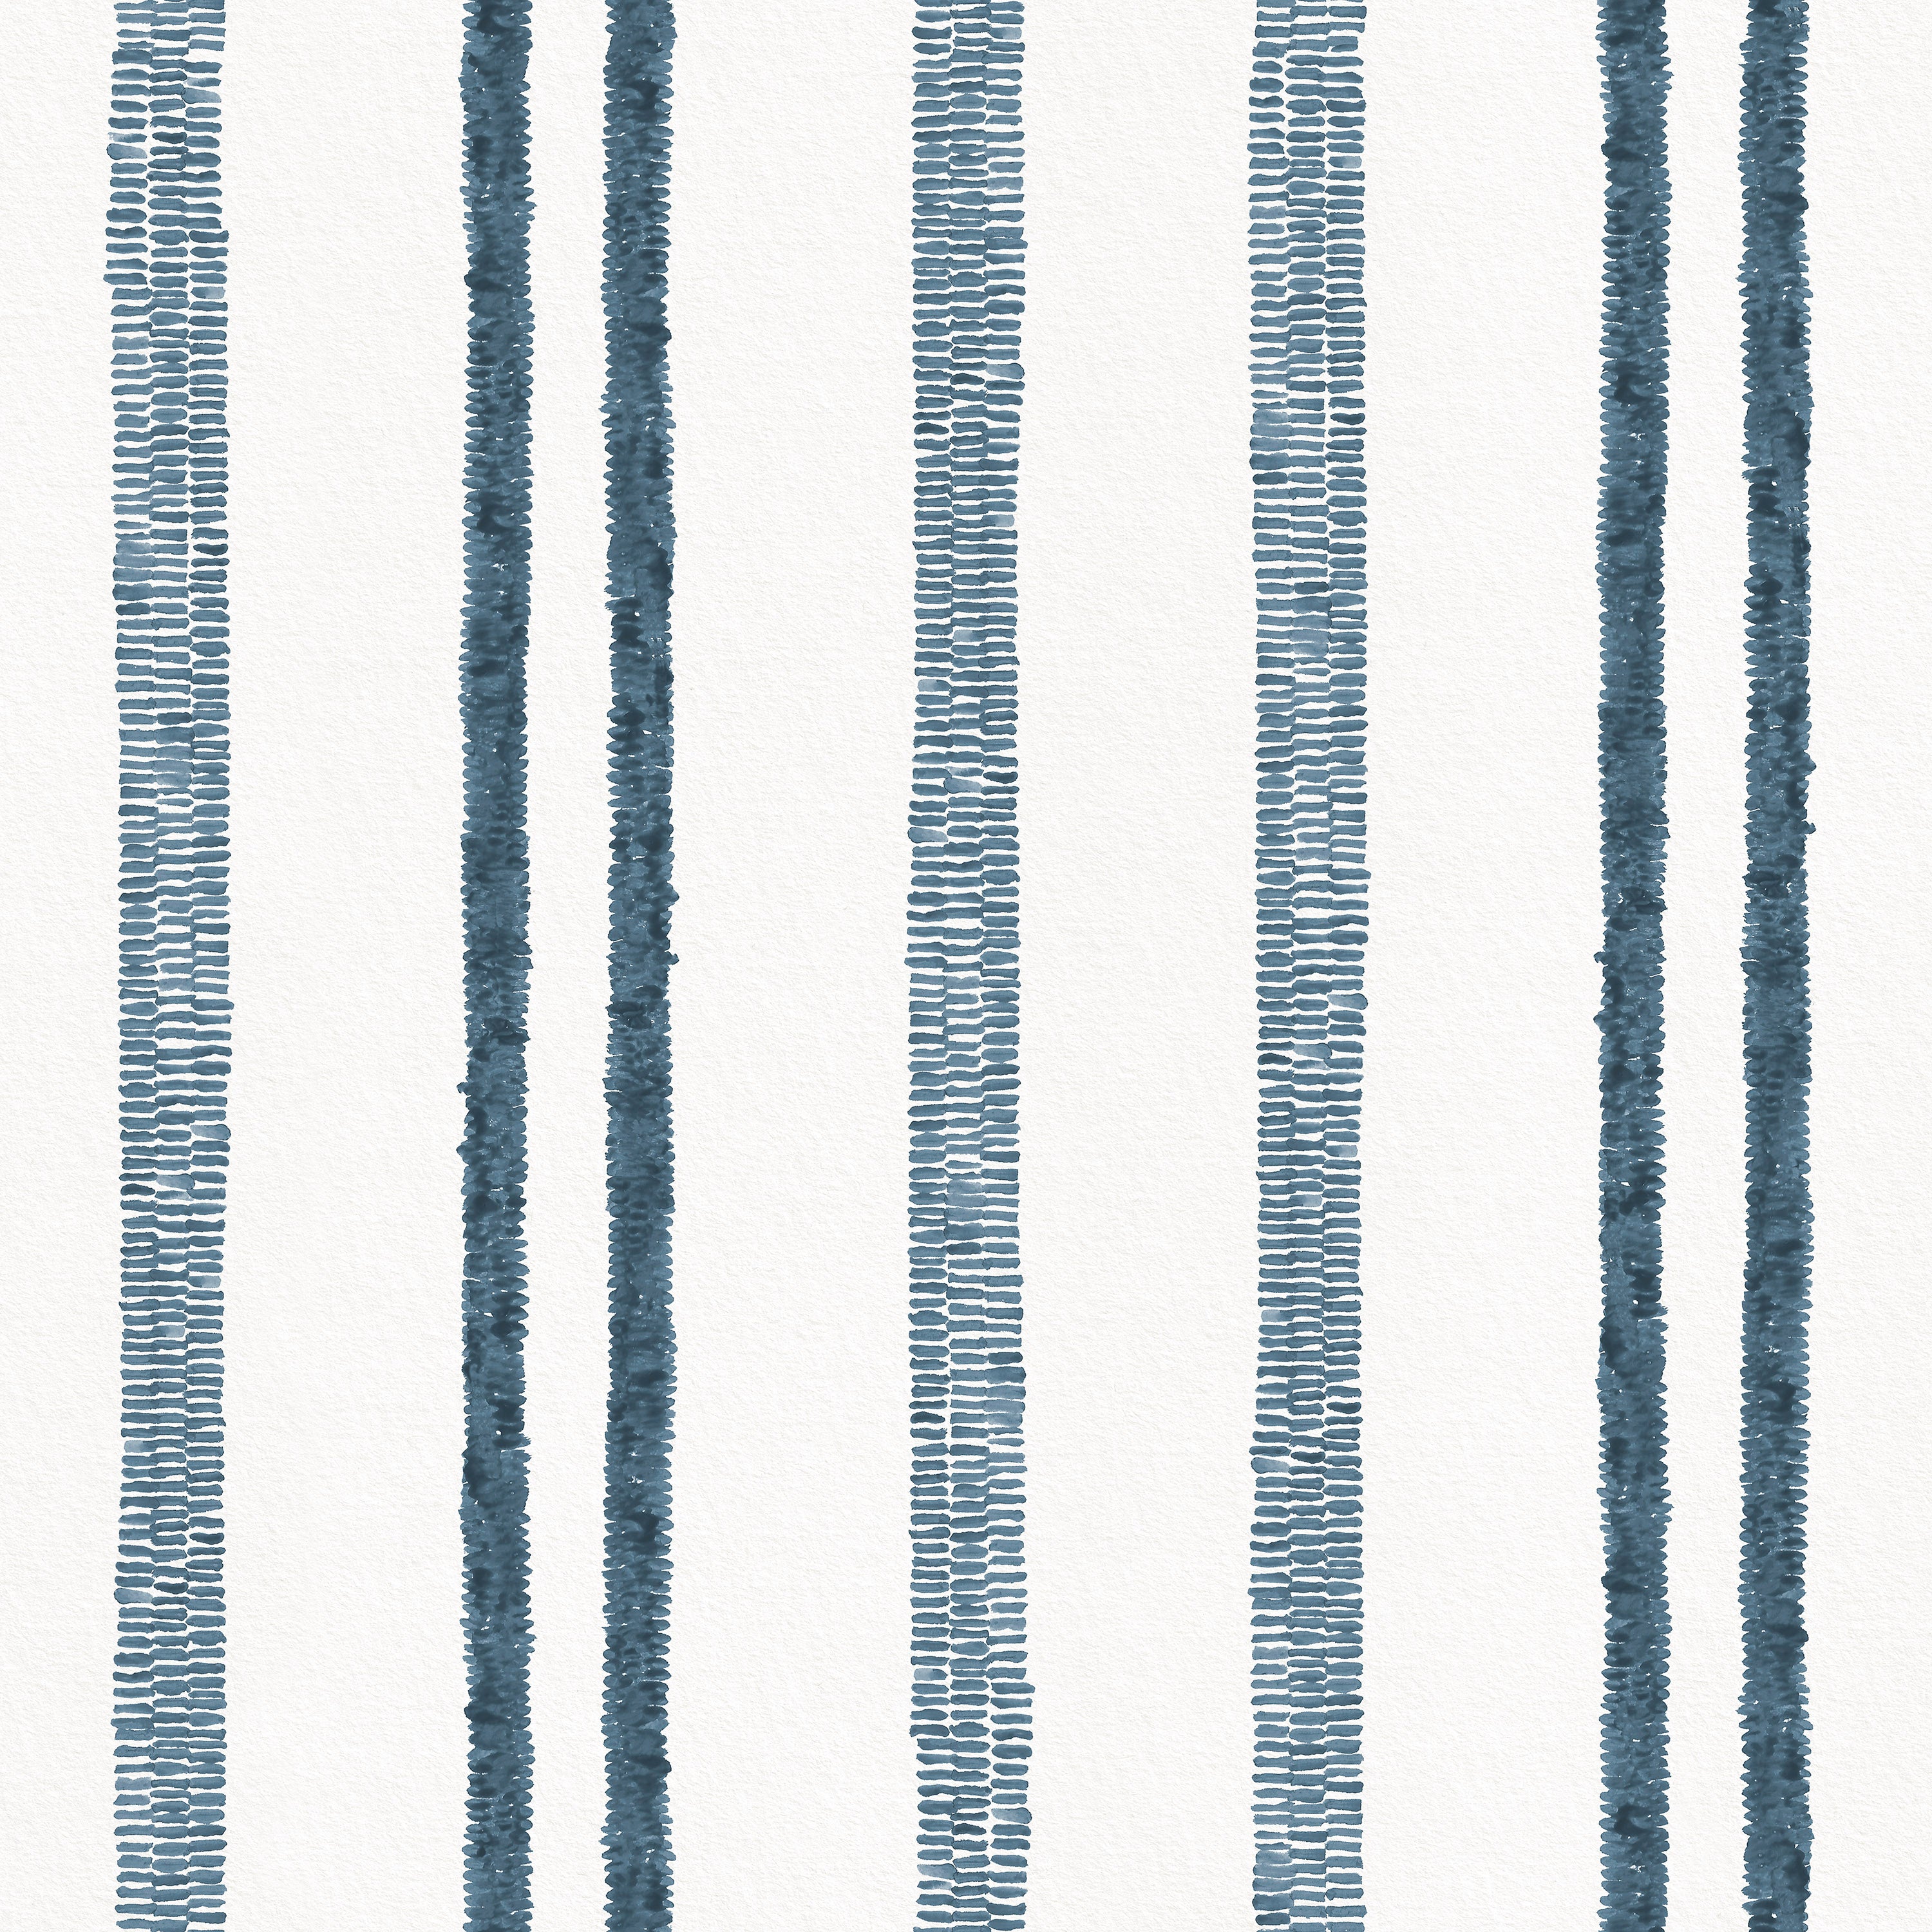 Detail of wallpaper in a textural stripe pattern in navy on a white field.